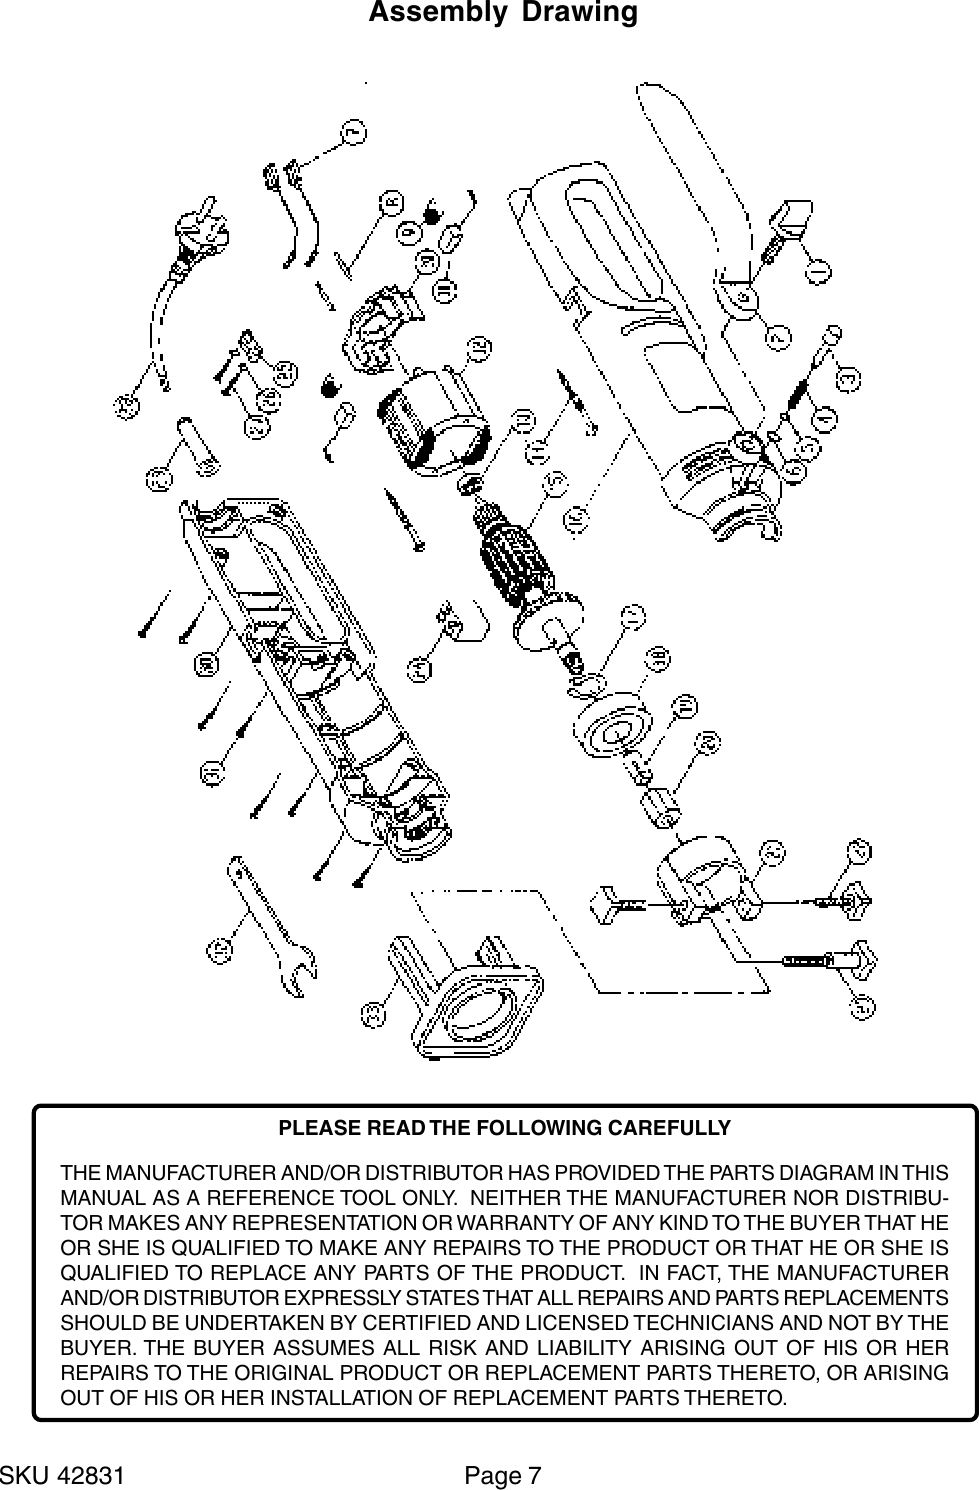 Page 7 of 8 - Harbor-Freight Harbor-Freight-3-5-Amp-Heavy-Duty-Electric-Cutout-Tool-Product-Manual- 42831  Harbor-freight-3-5-amp-heavy-duty-electric-cutout-tool-product-manual